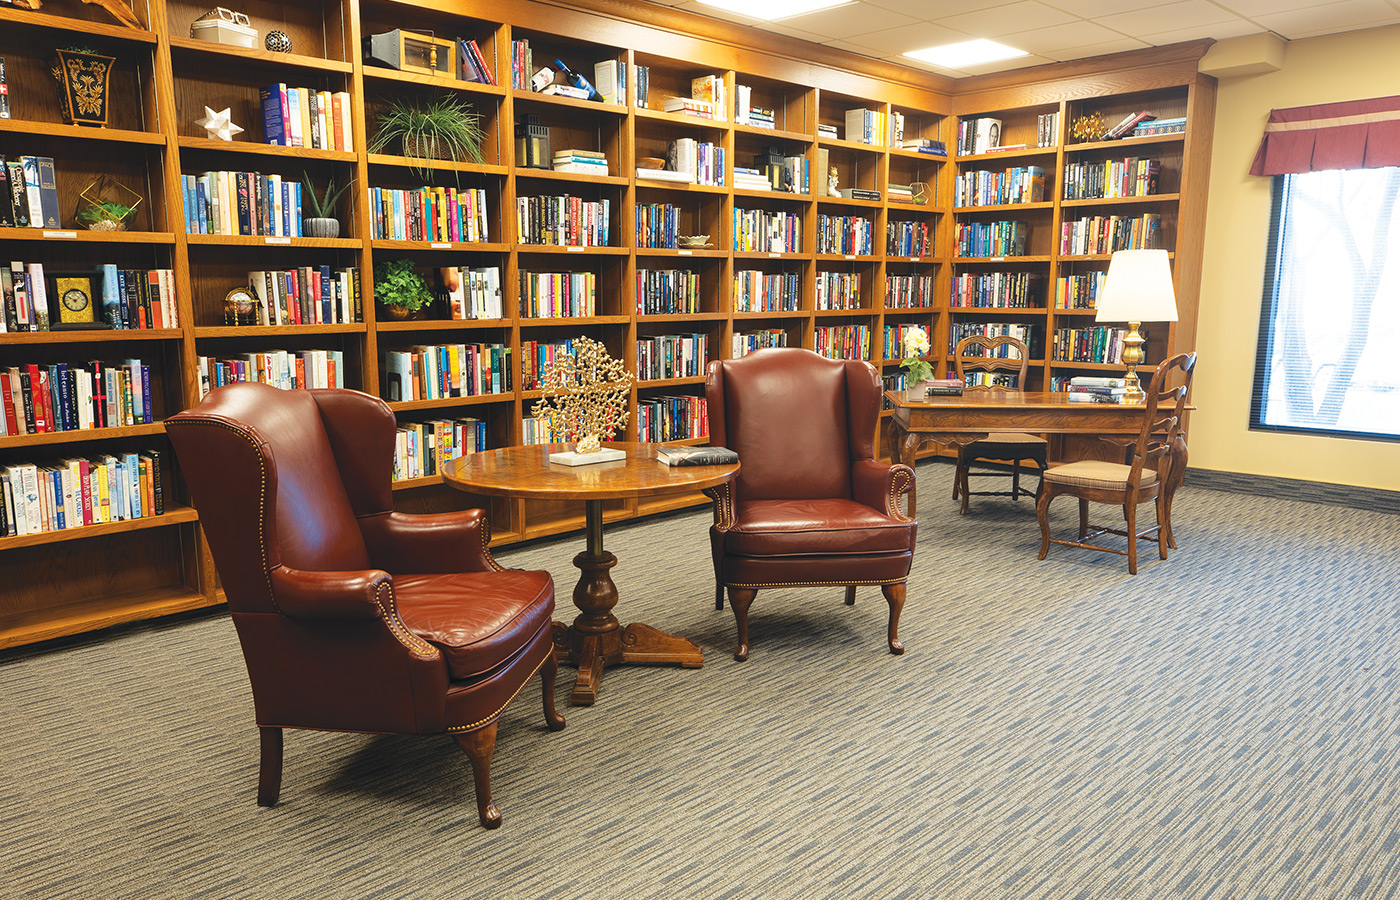 The library at The Watermark at East Hill.